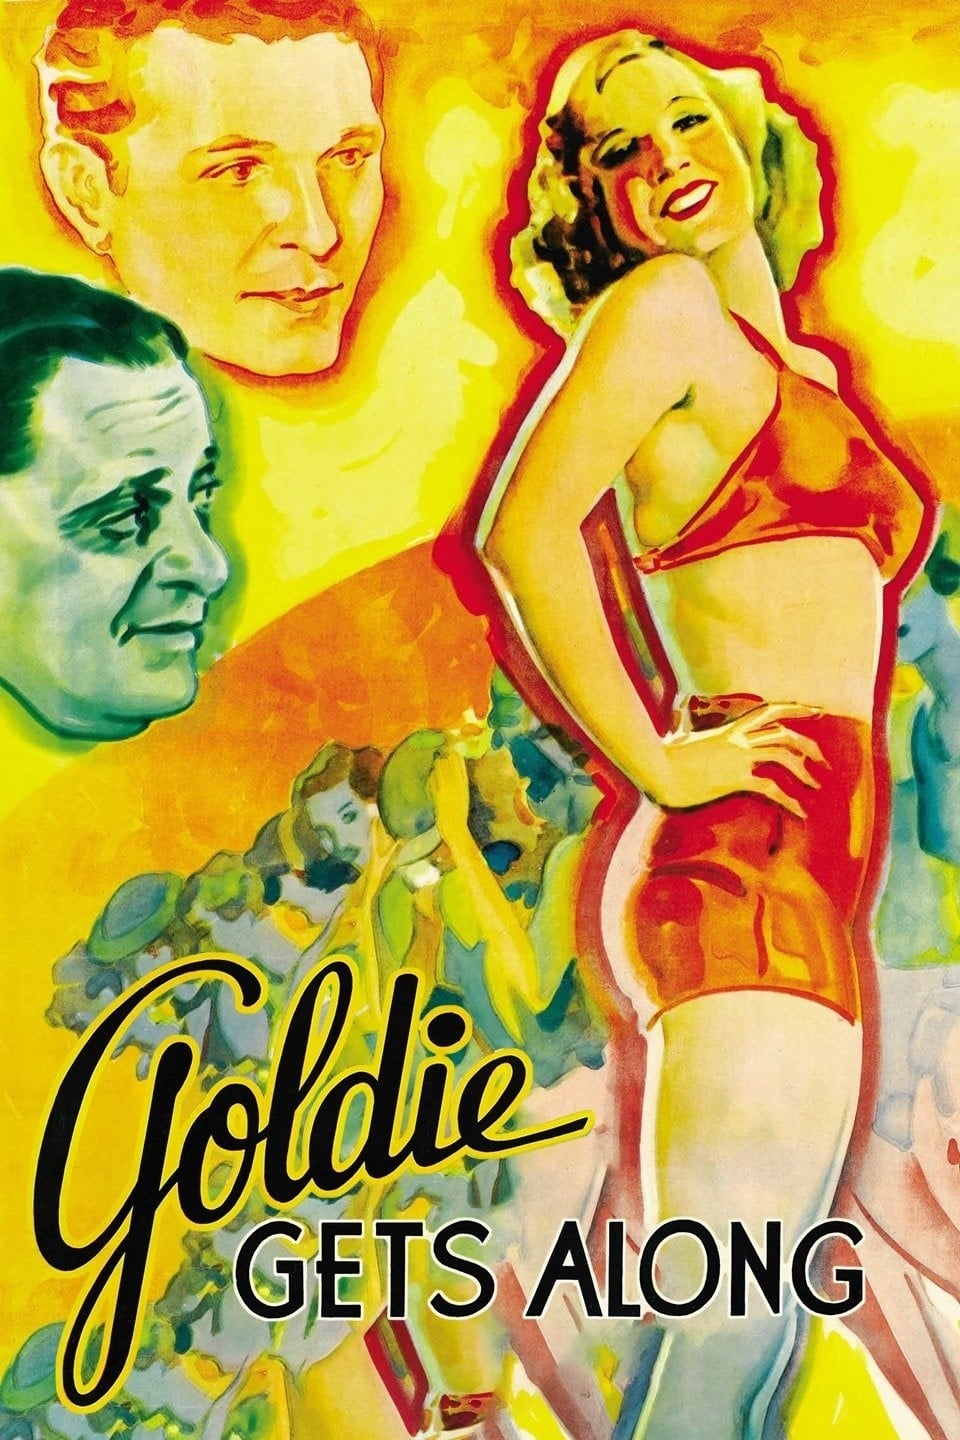 Goldie Gets Along (1933)